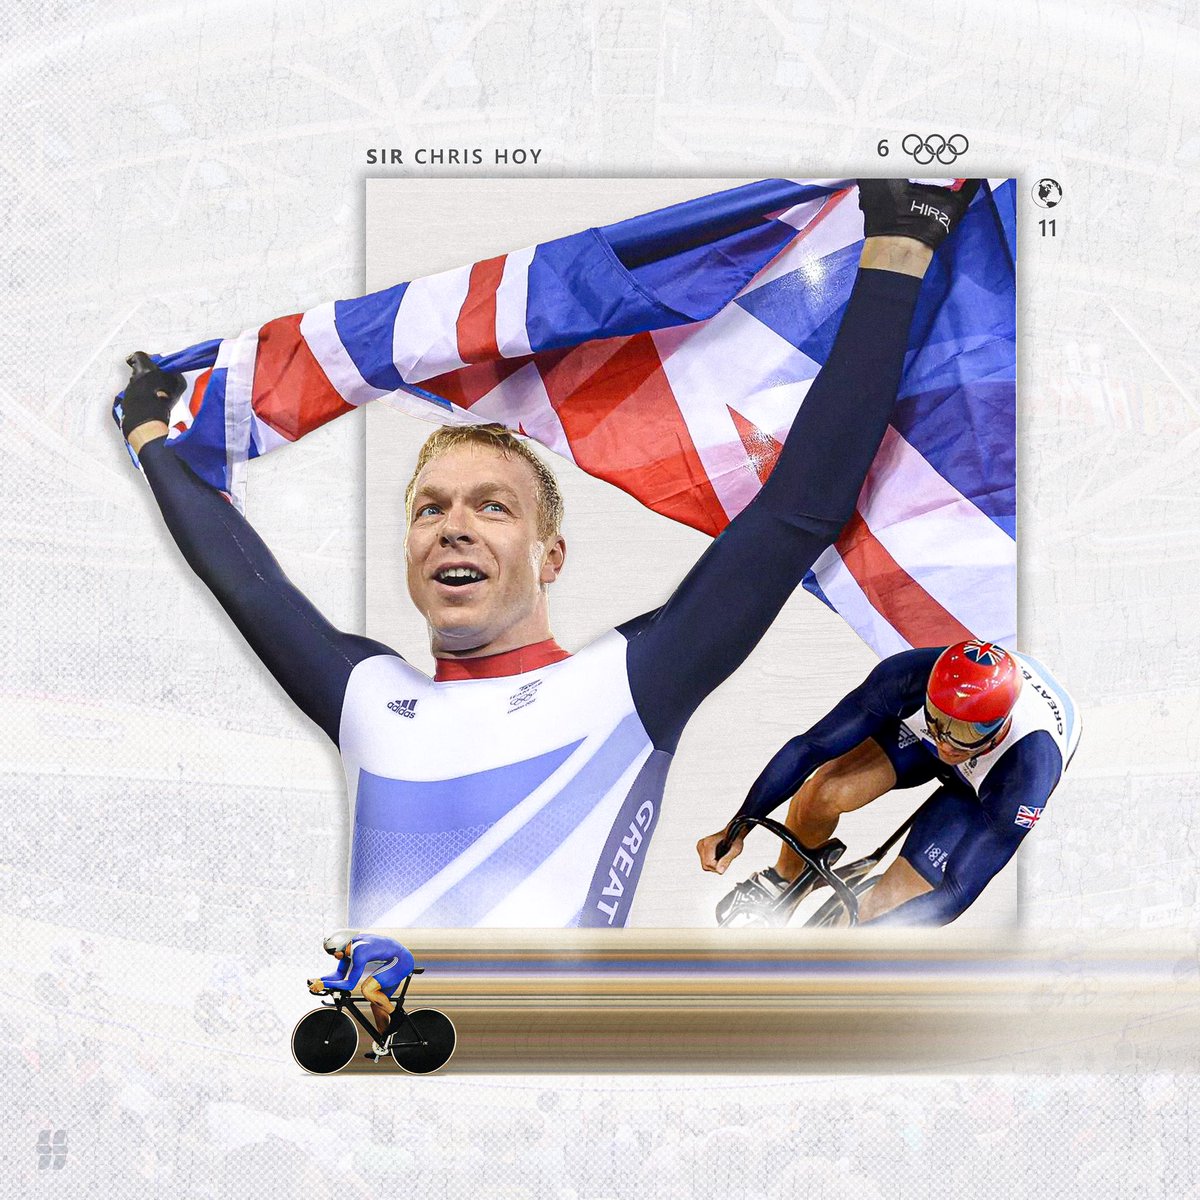 Just a little something I put together. @chrishoy 

#SirChrisHoy #cycling #british #greatbritain #olympics #worldchampion #sir #sport #sports #sportsgraphic #graphicdesign #graphicdesigner